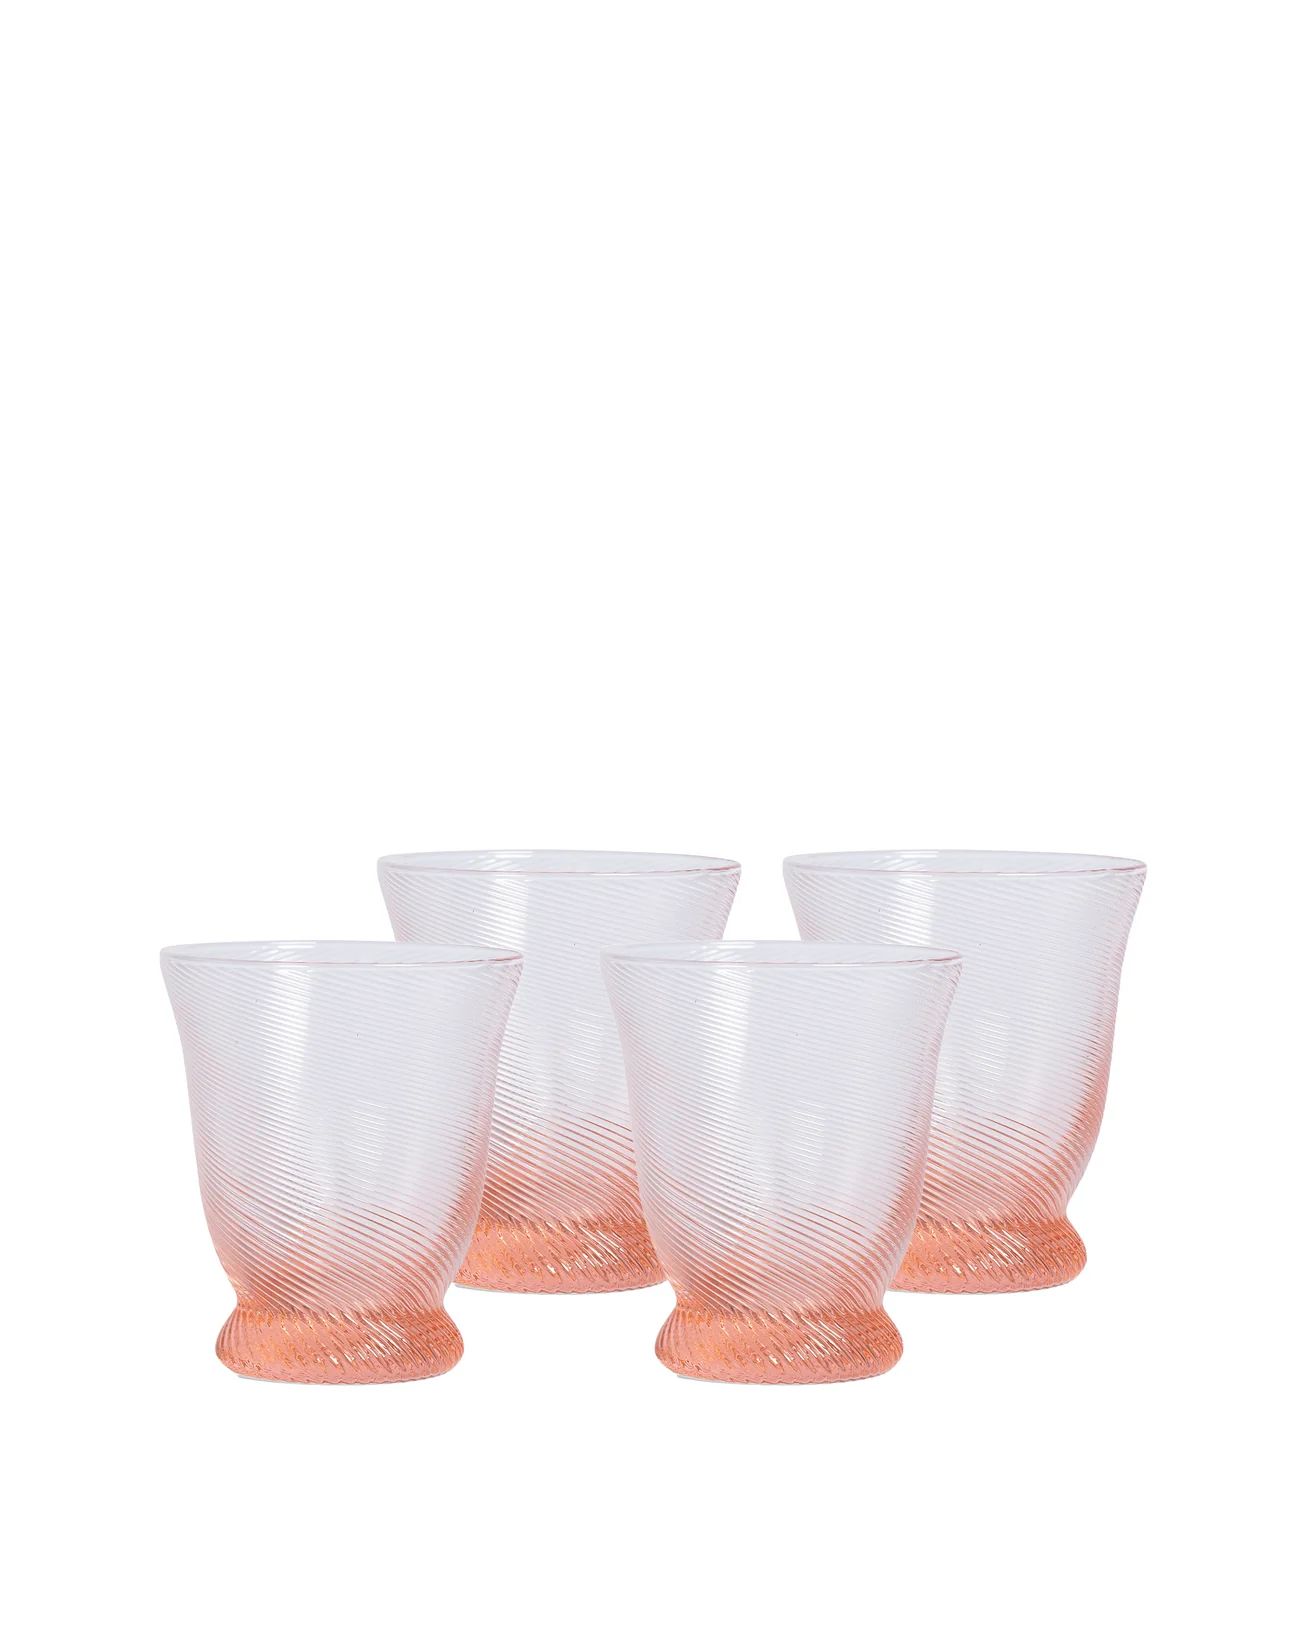 Spiral Glass Tumblers | Sharland England by Louise Roe | Sharland England